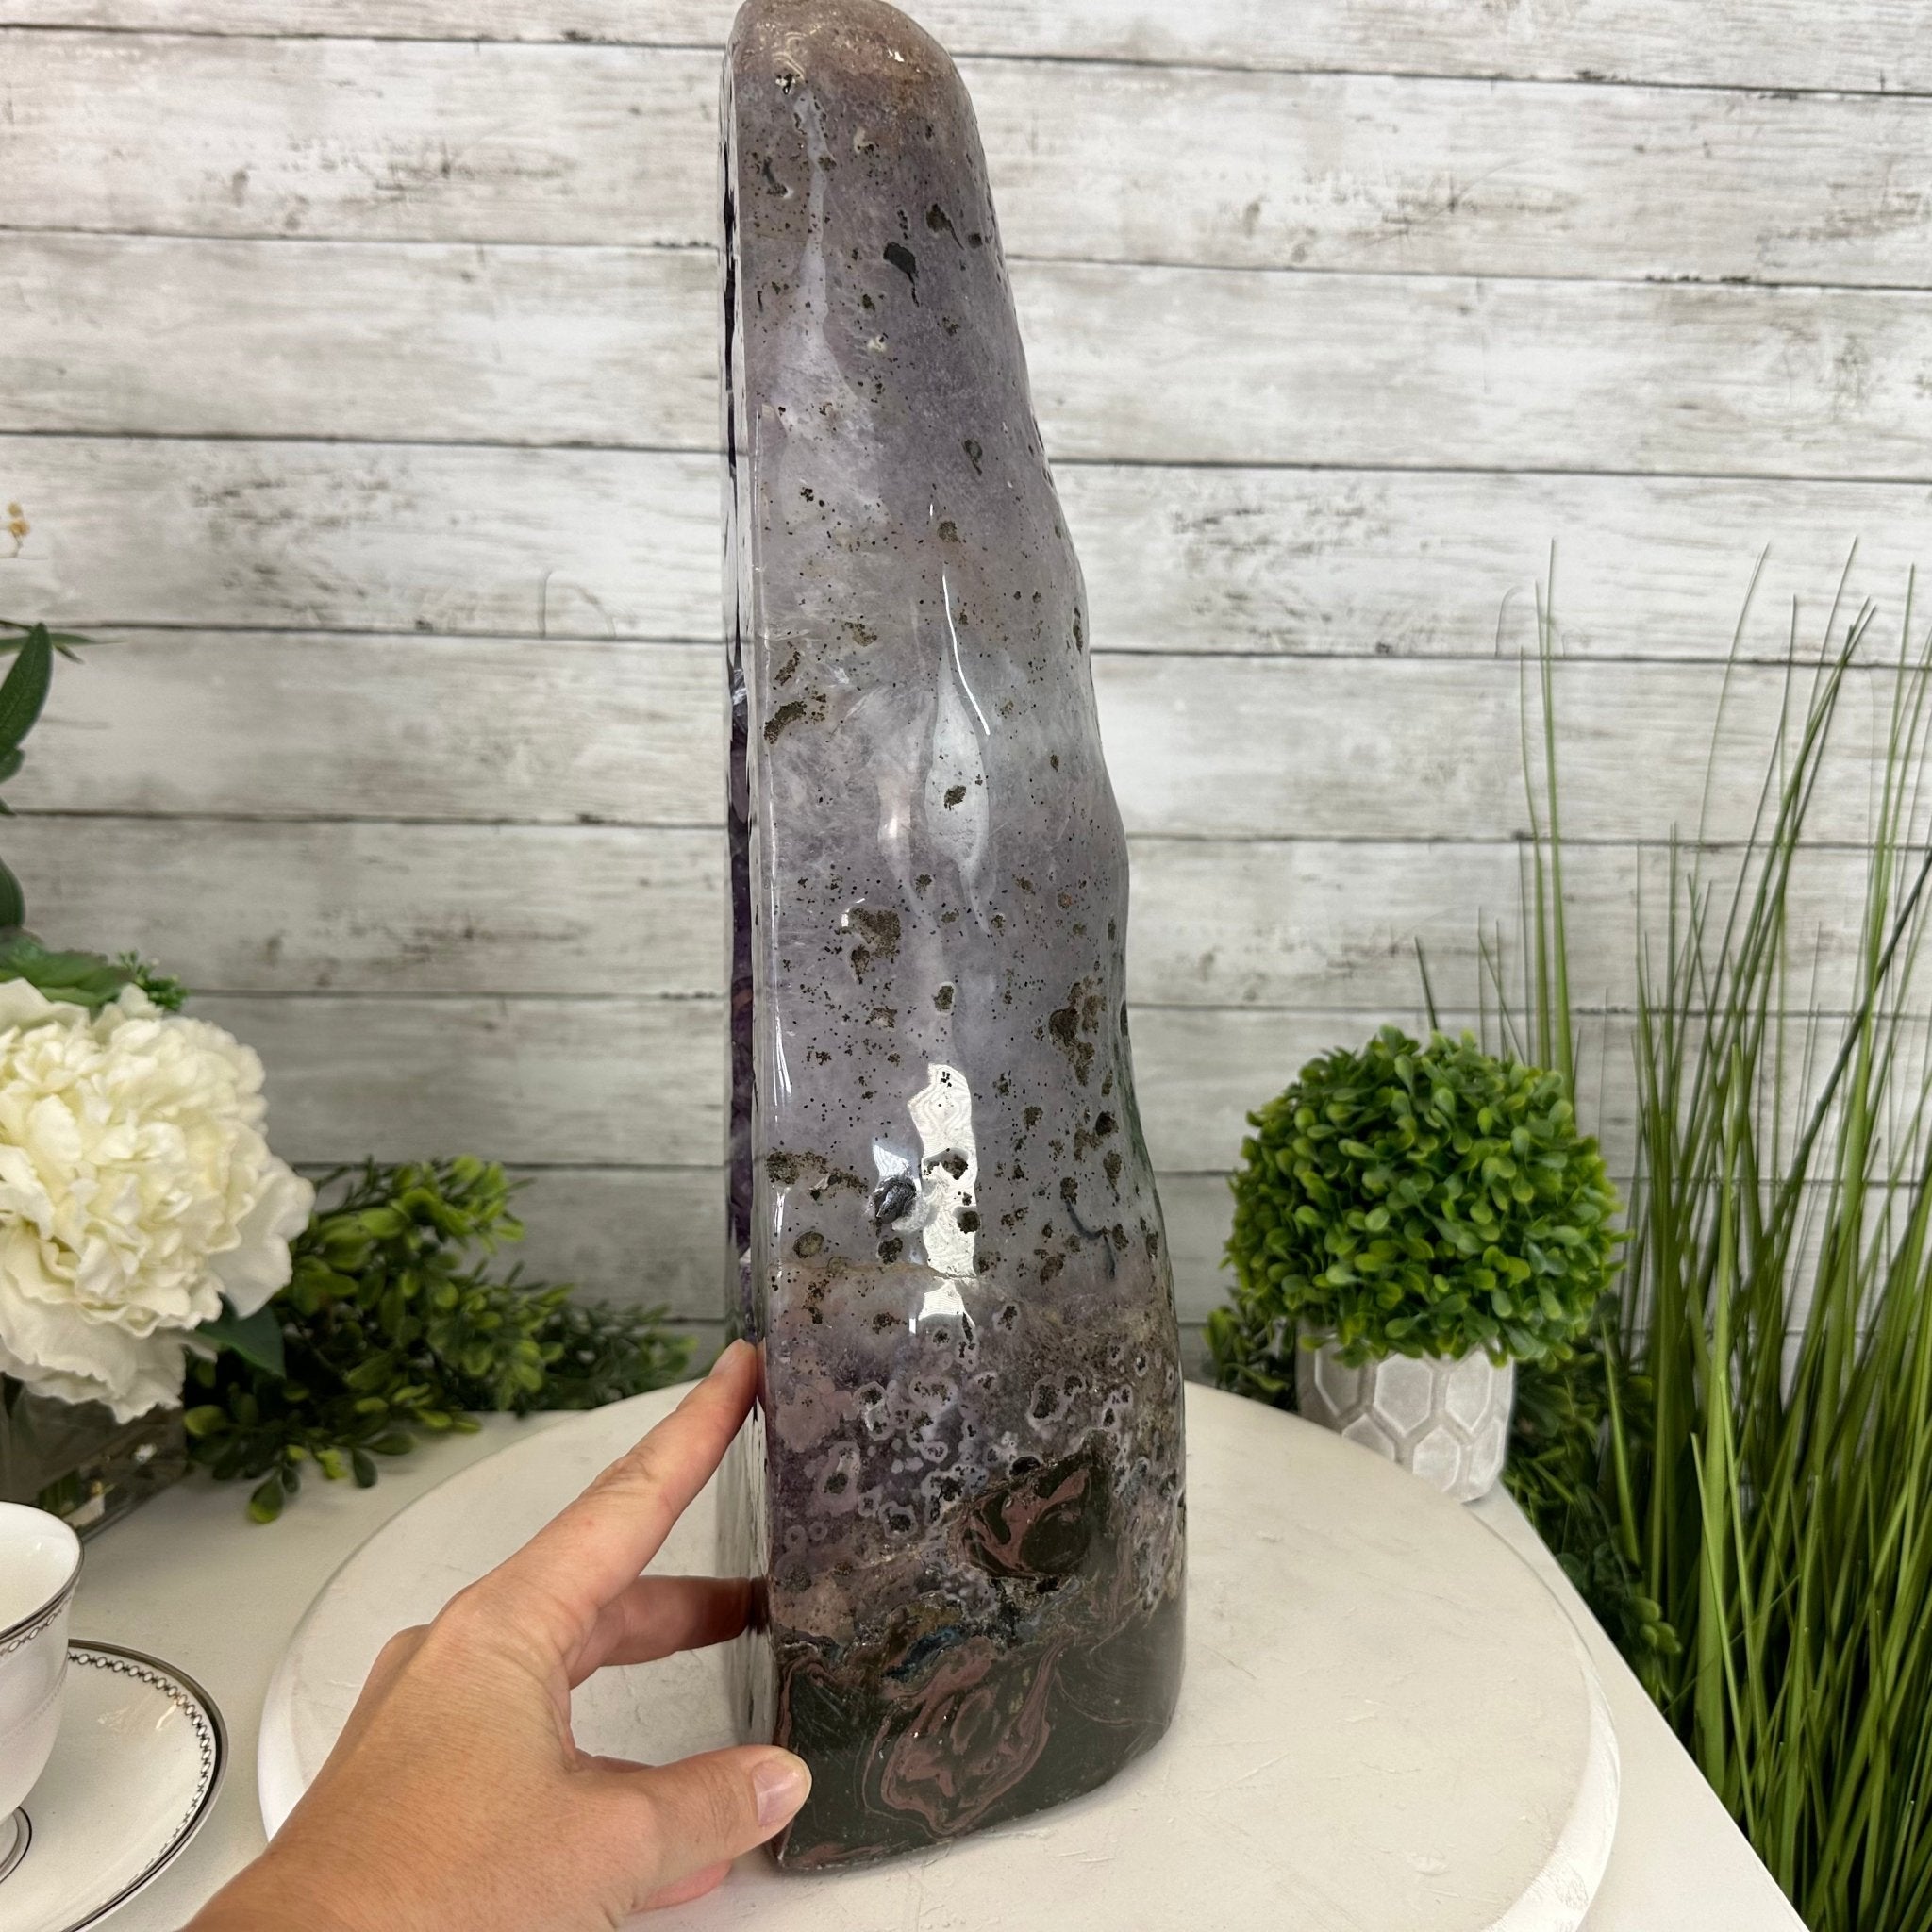 Extra Plus Quality Polished Brazilian Amethyst Cathedral, 27.8 lbs & 17.1" tall Model #5602-0156 by Brazil Gems - Brazil GemsBrazil GemsExtra Plus Quality Polished Brazilian Amethyst Cathedral, 27.8 lbs & 17.1" tall Model #5602-0156 by Brazil GemsPolished Cathedrals5602-0156